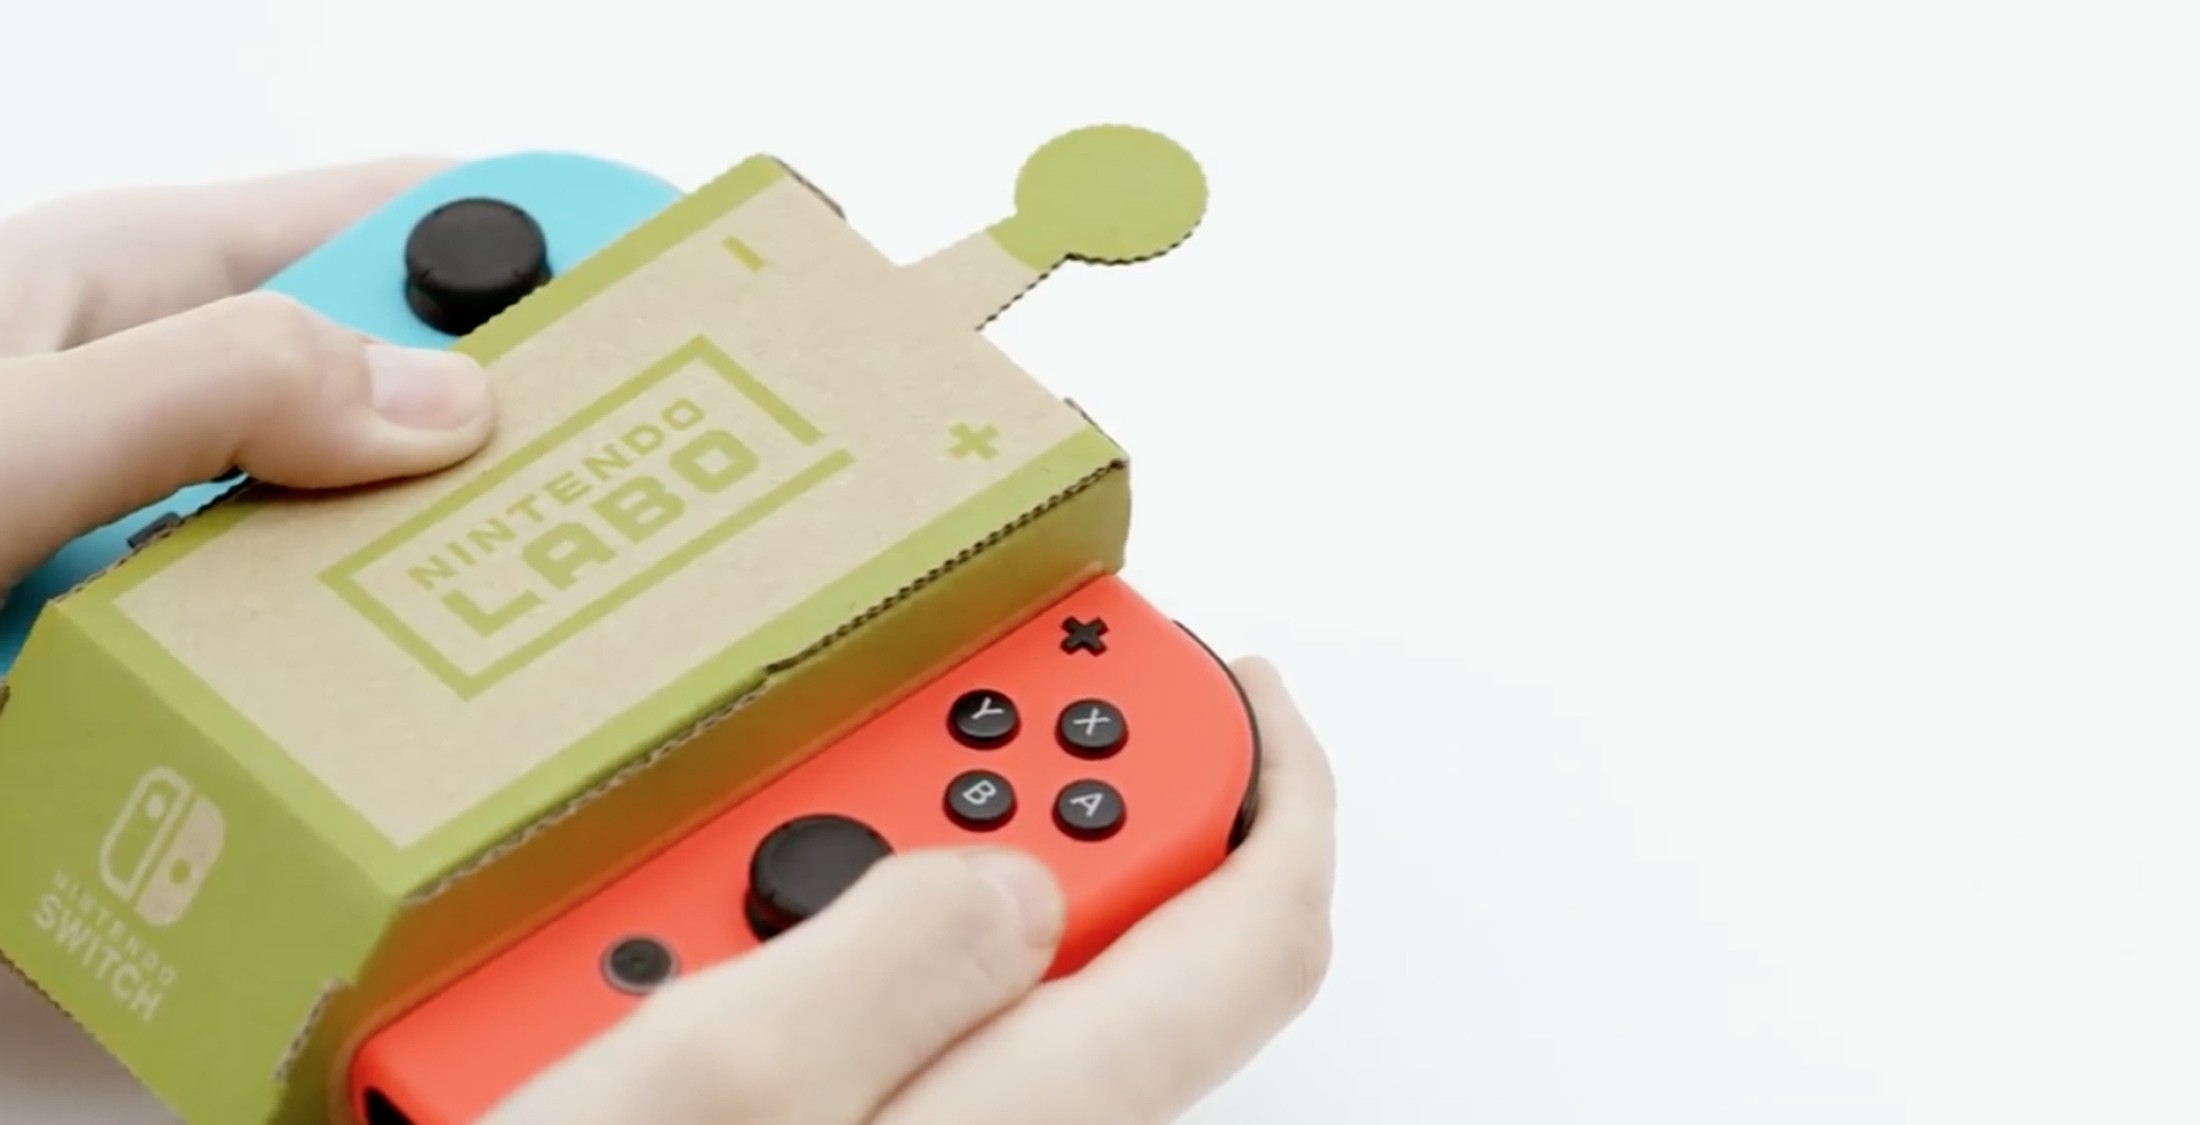 The Nintendo Labo, a build-it-yourself cardboard accessory that works with company’s Switch console, is a whole lot of fun in a lot of ways – but might not be for everyone